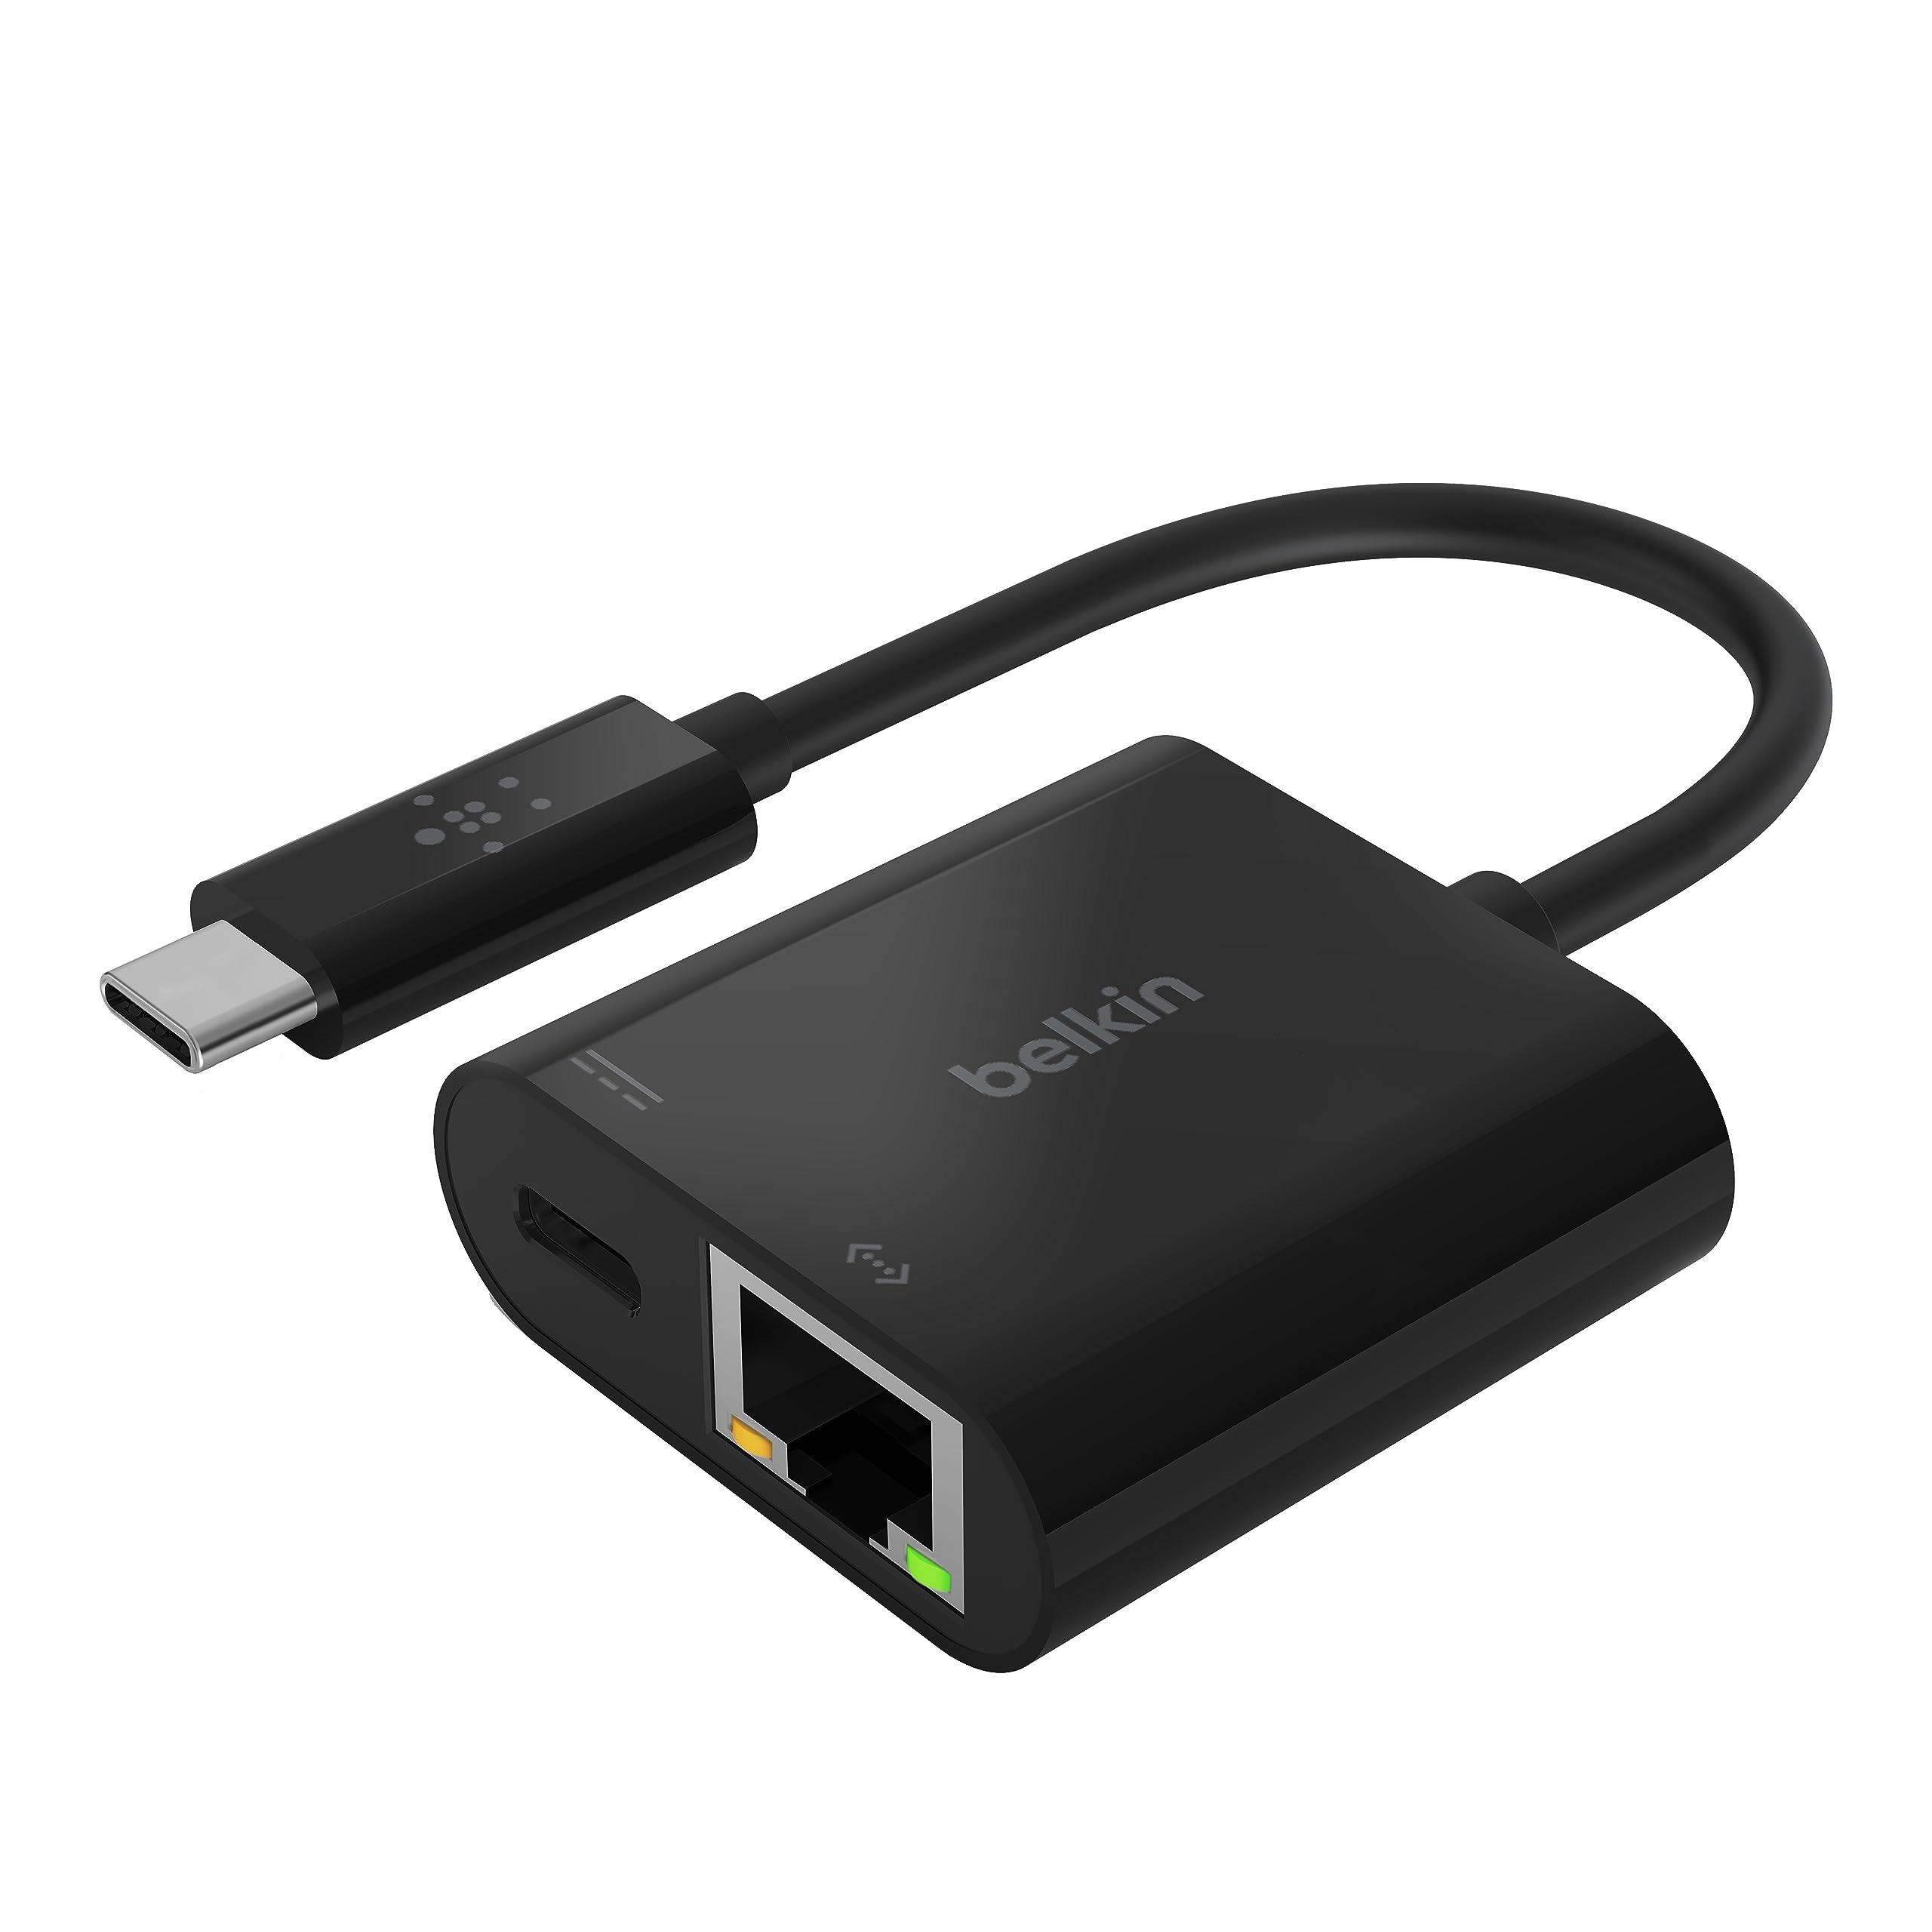 Belkin USB-C to Ethernet Adapter + Charge (60W, 1000 Mbps Ethernet Speeds) MacBook Pro Ethernet Adapter